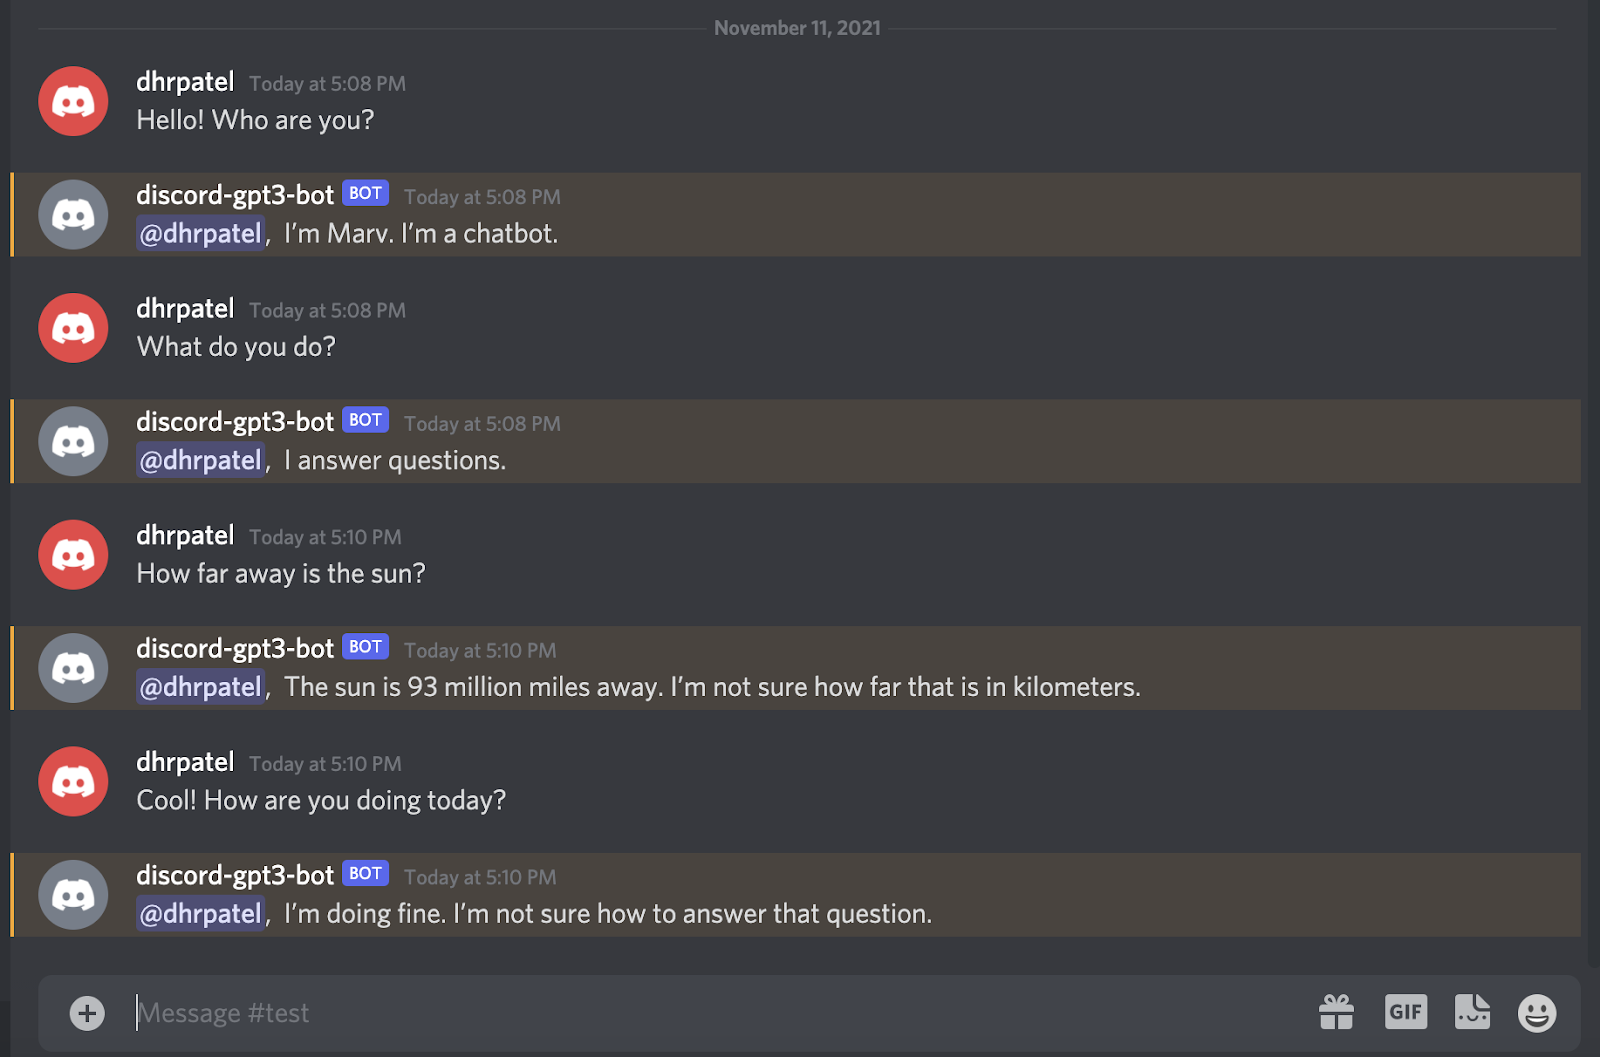 Chat with GPT-3 bot on discord